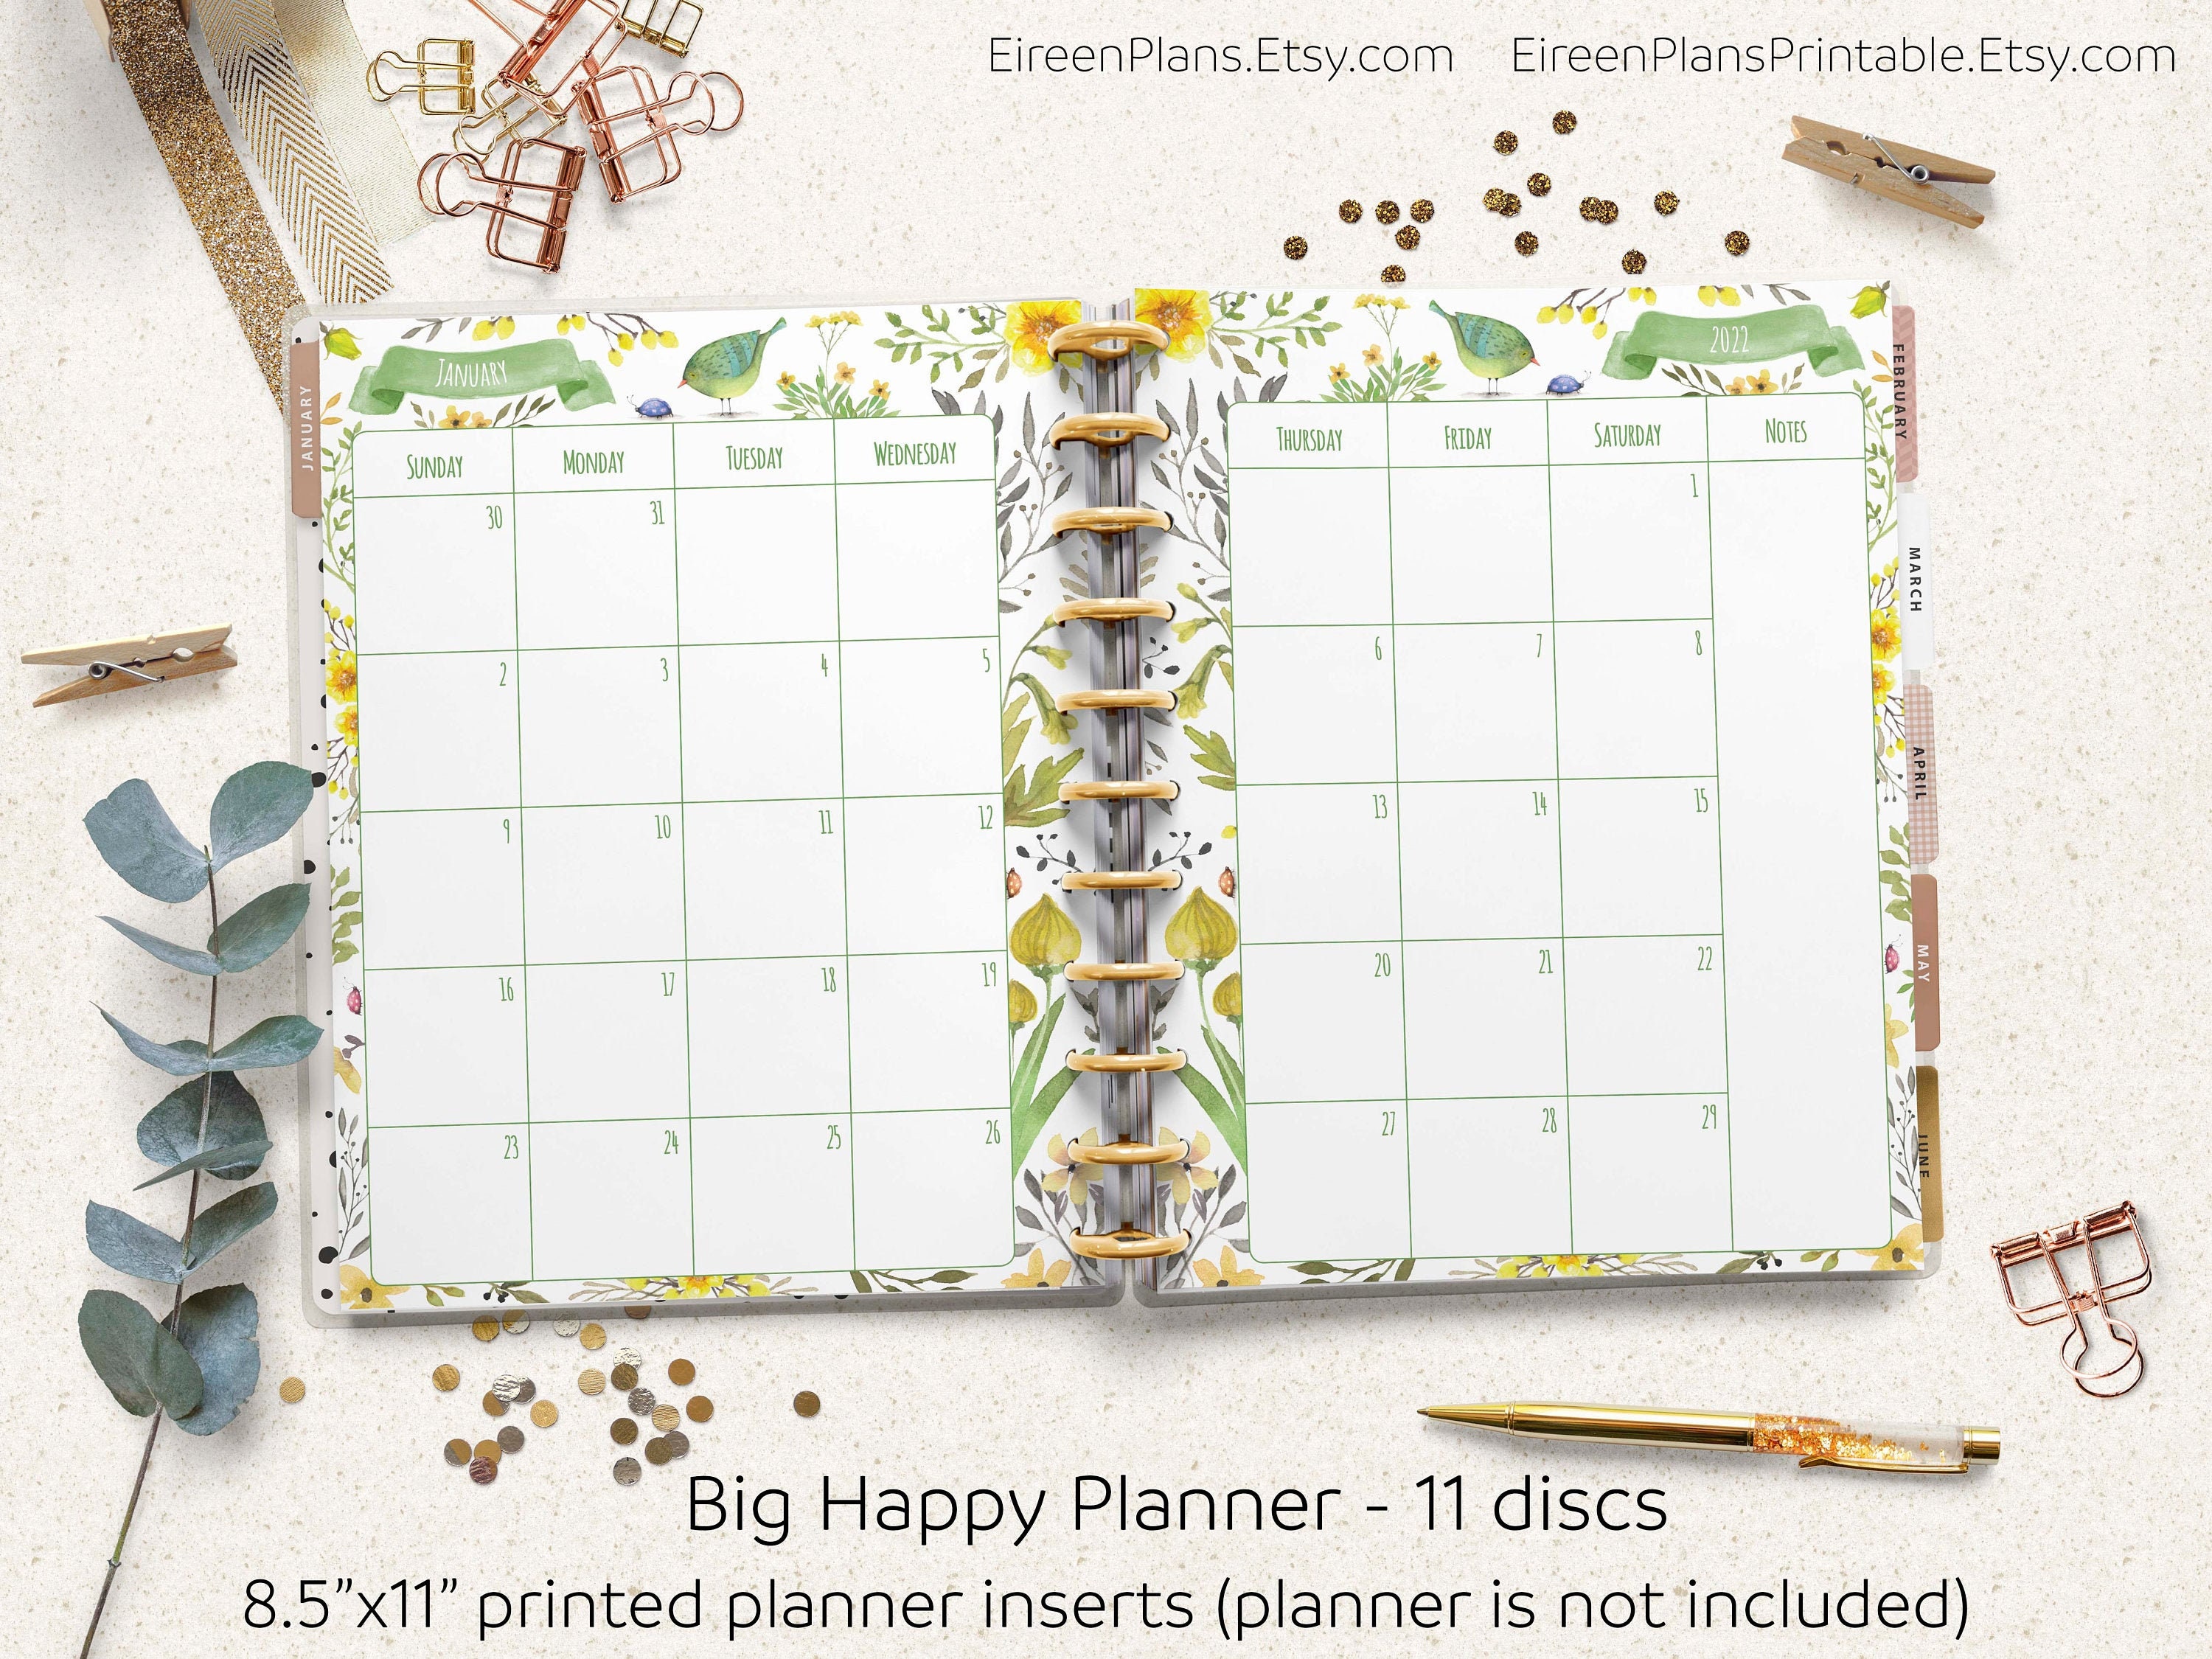 2022 2023 2024 2025 2026 PRINTED Monthly BIG Happy Planner Etsy